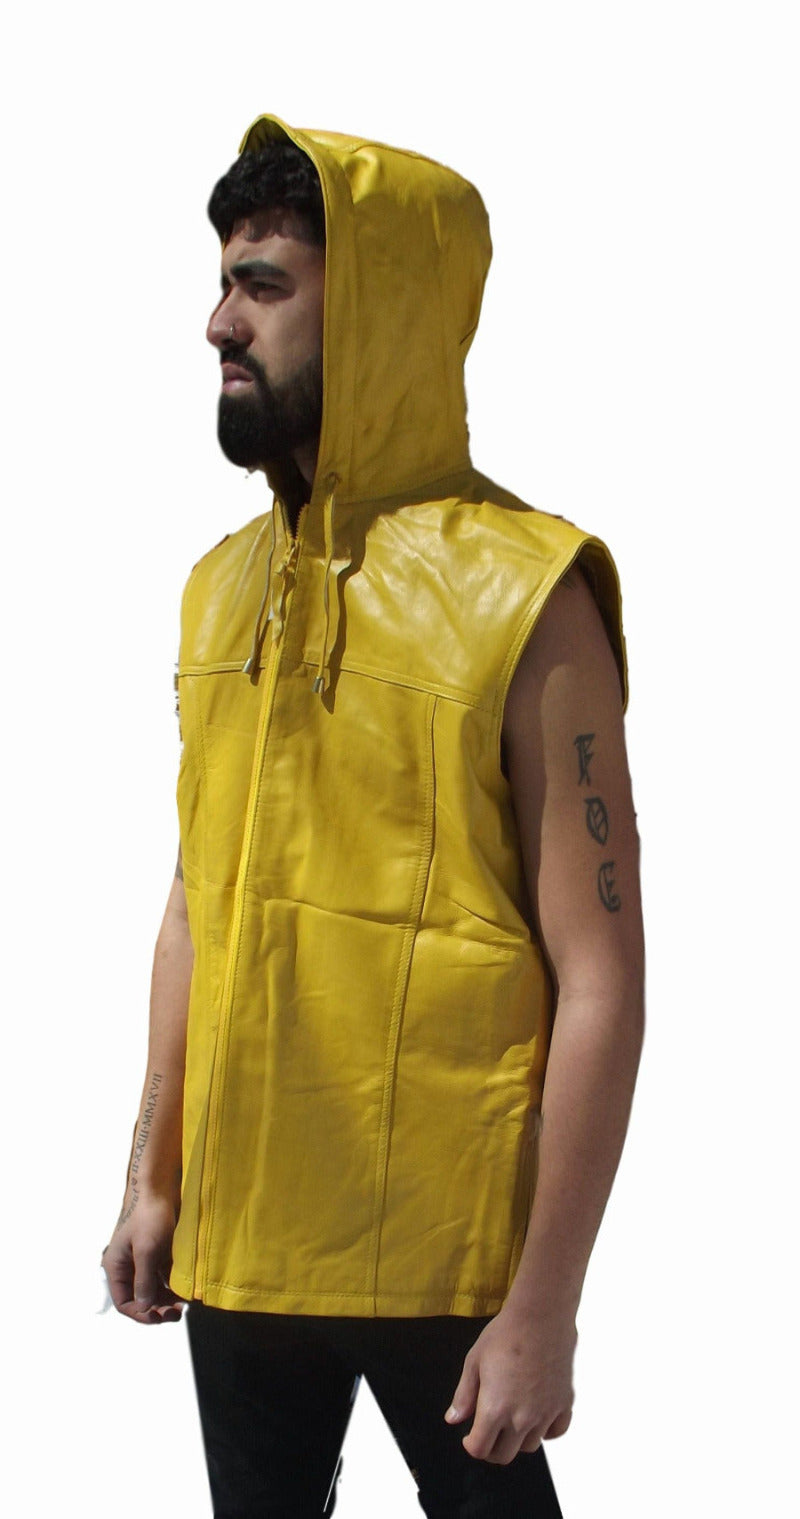 Mens leather vest with hood yellow color side view 